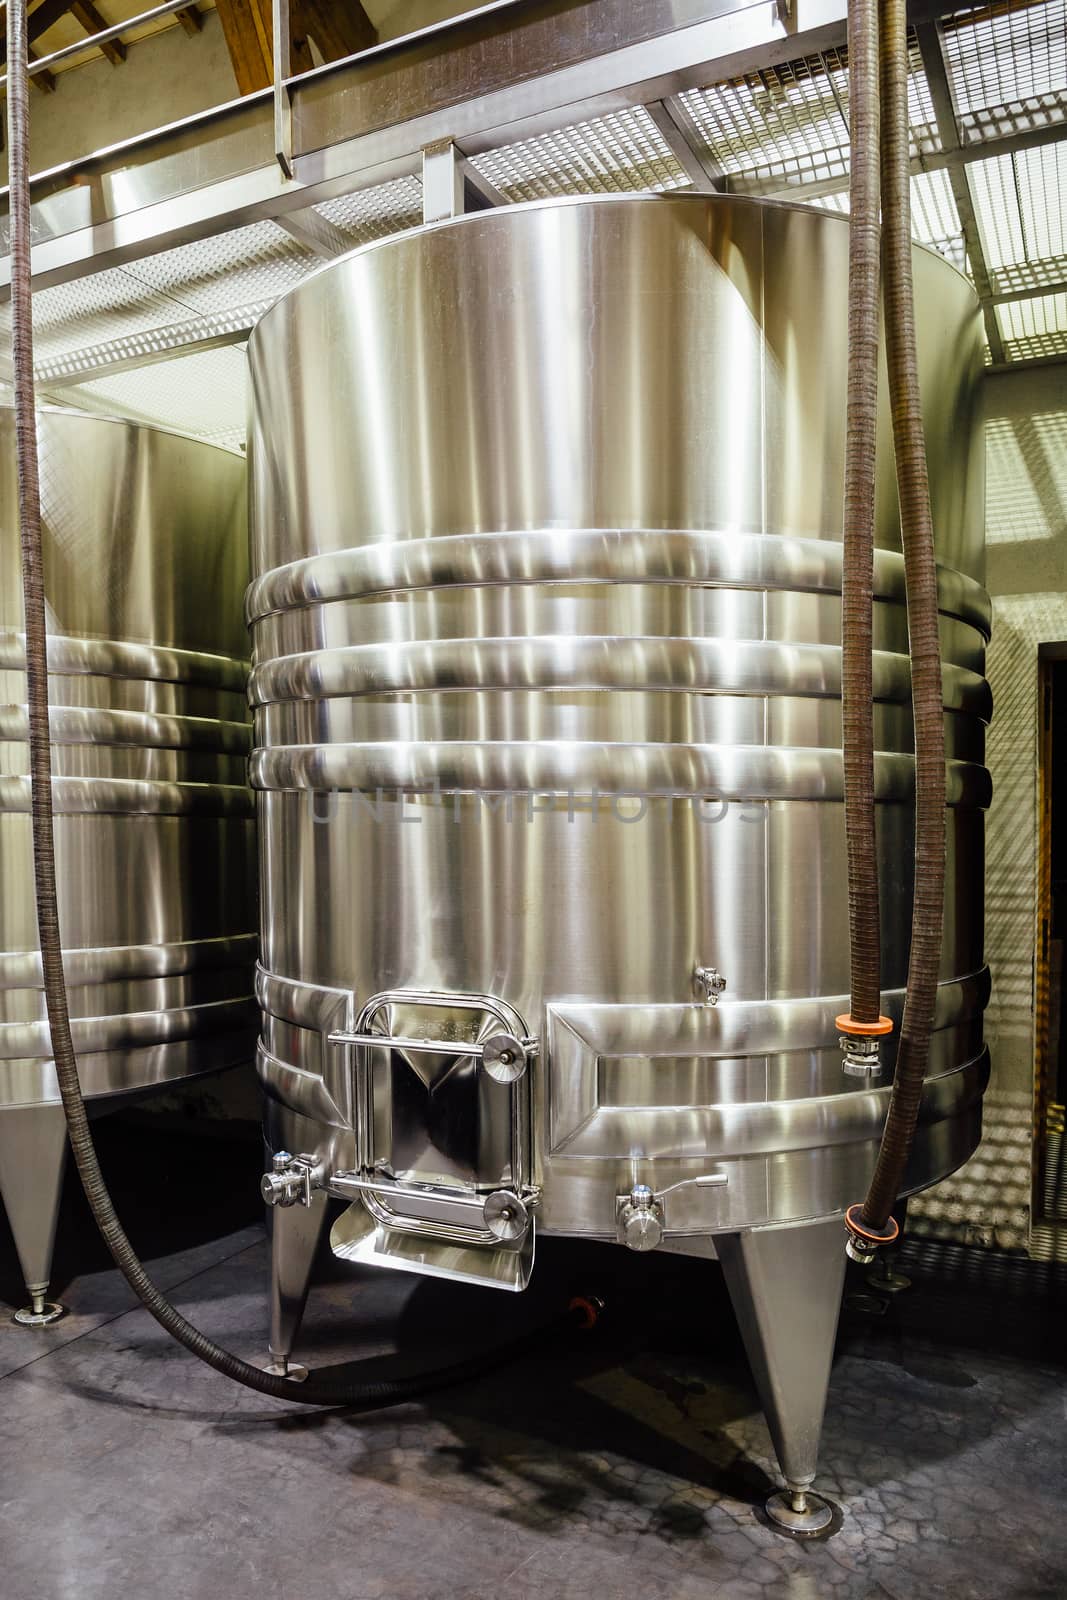 Stainless steel wine tank in a winery.